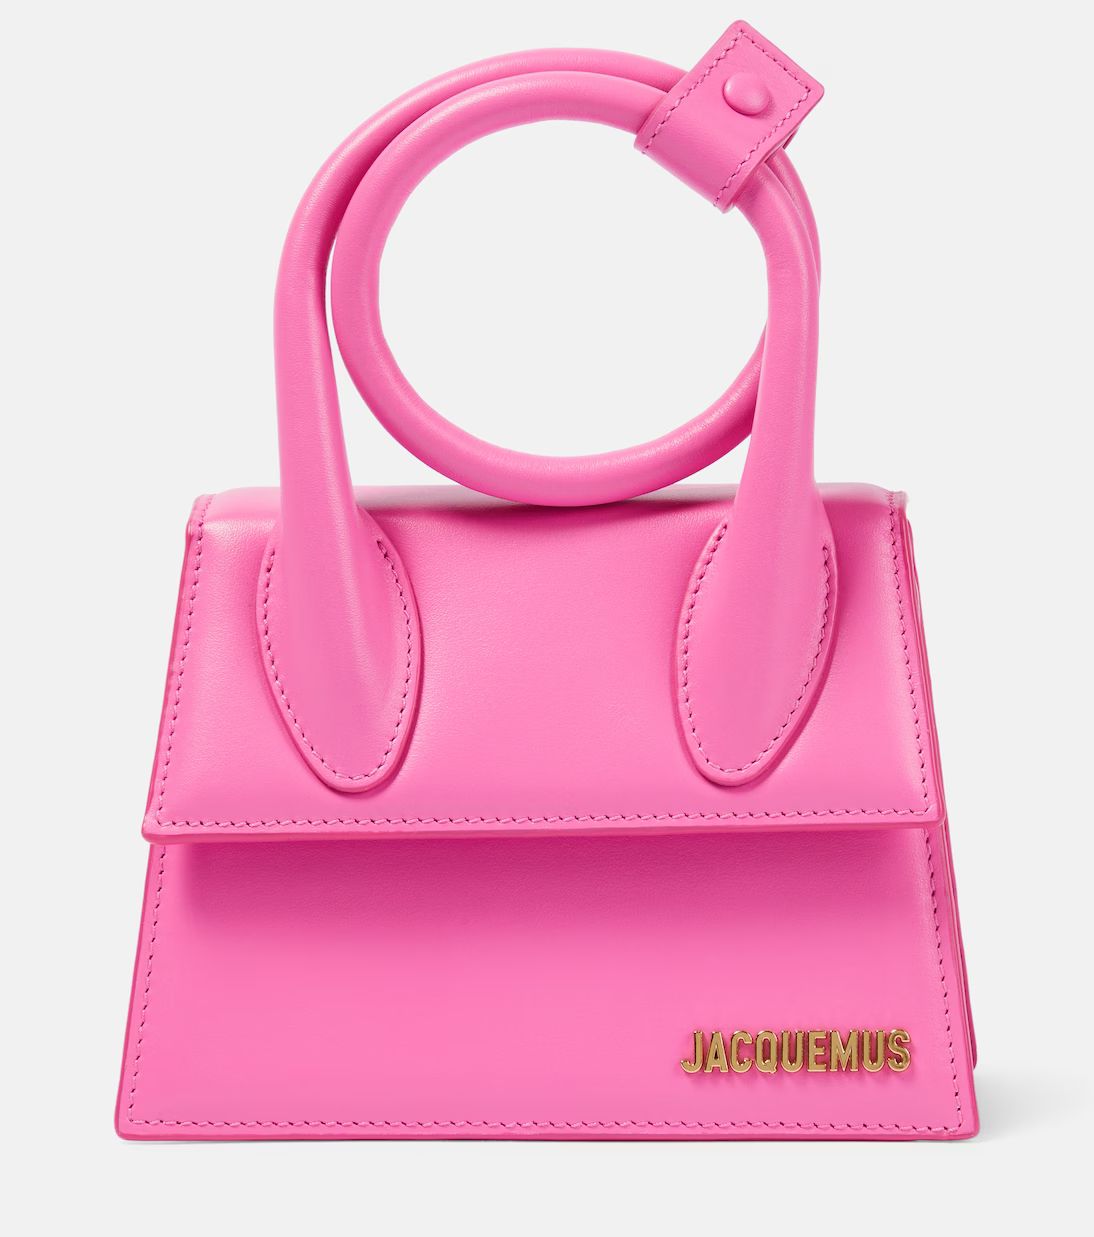 Le Chiquito Noeud leather tote bag | Mytheresa (INTL)